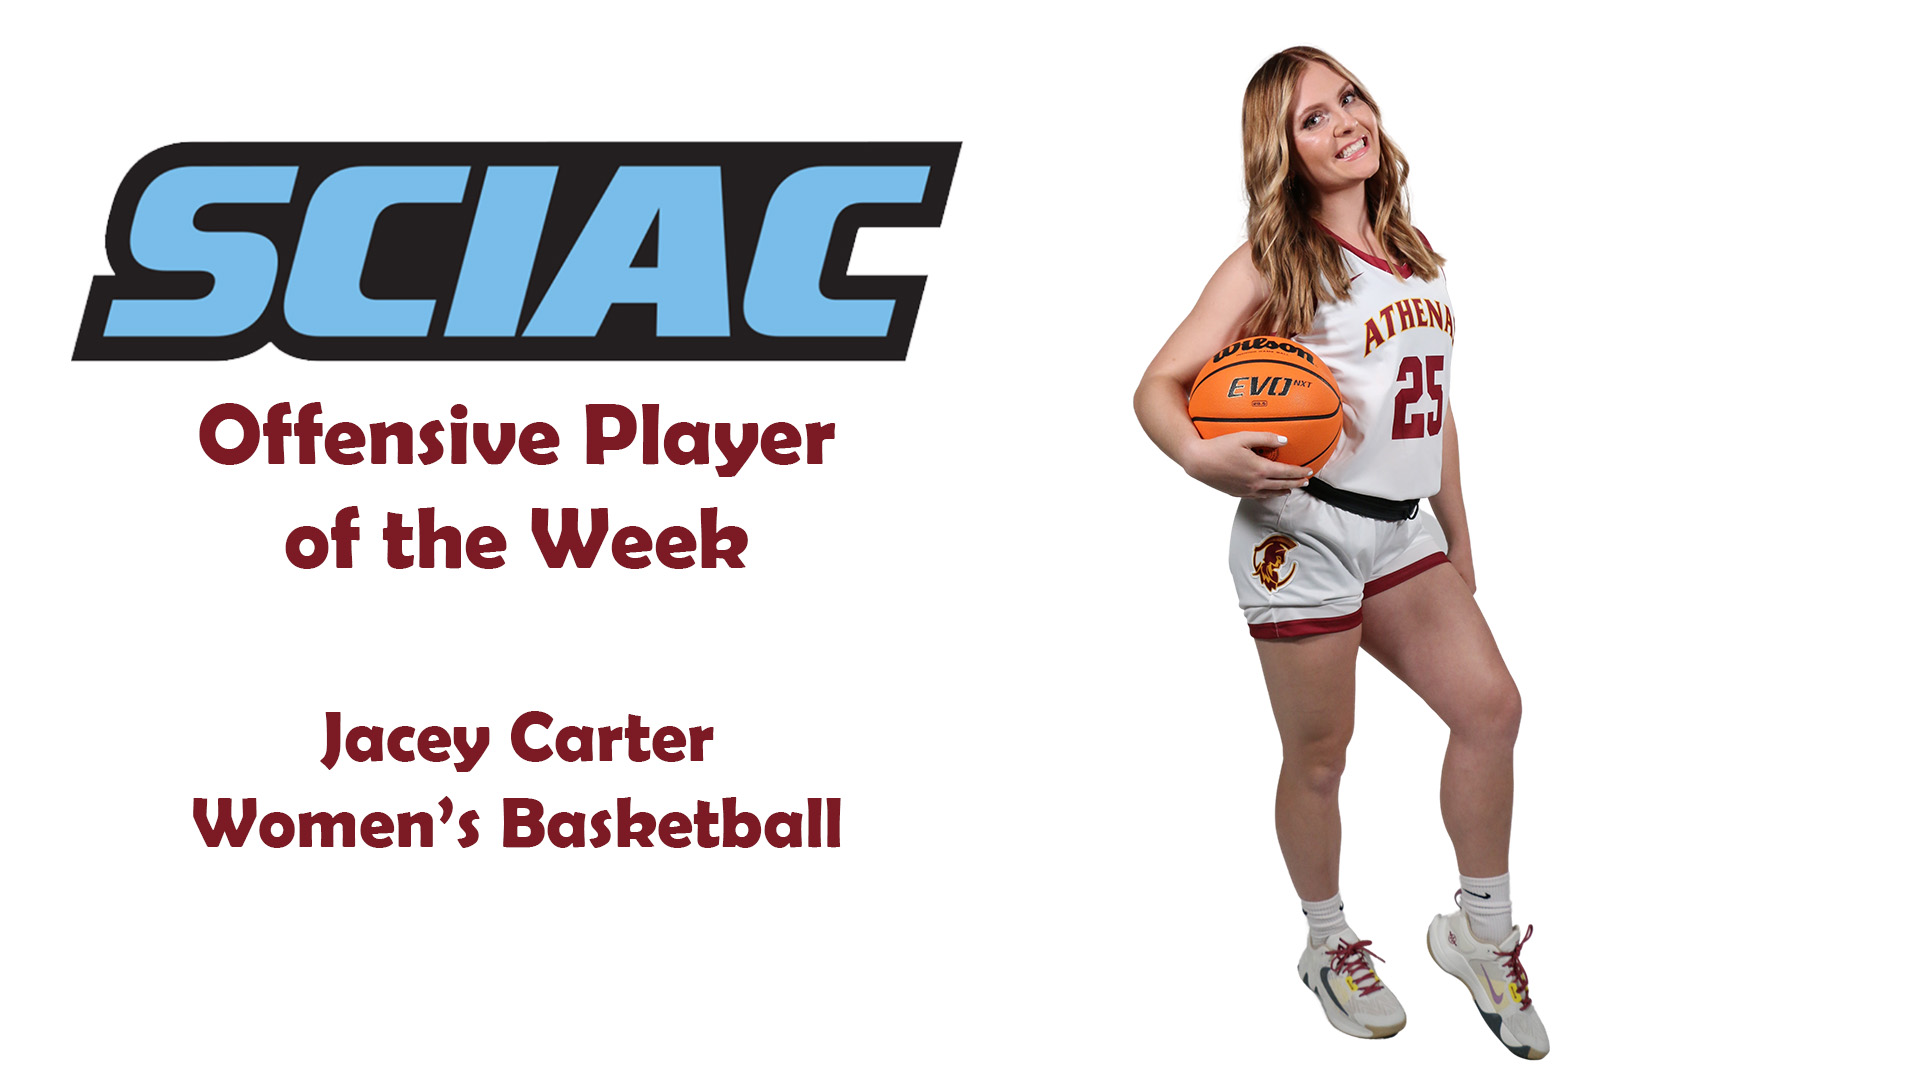 Posed shot of Jacey Carter with SCIAC logo